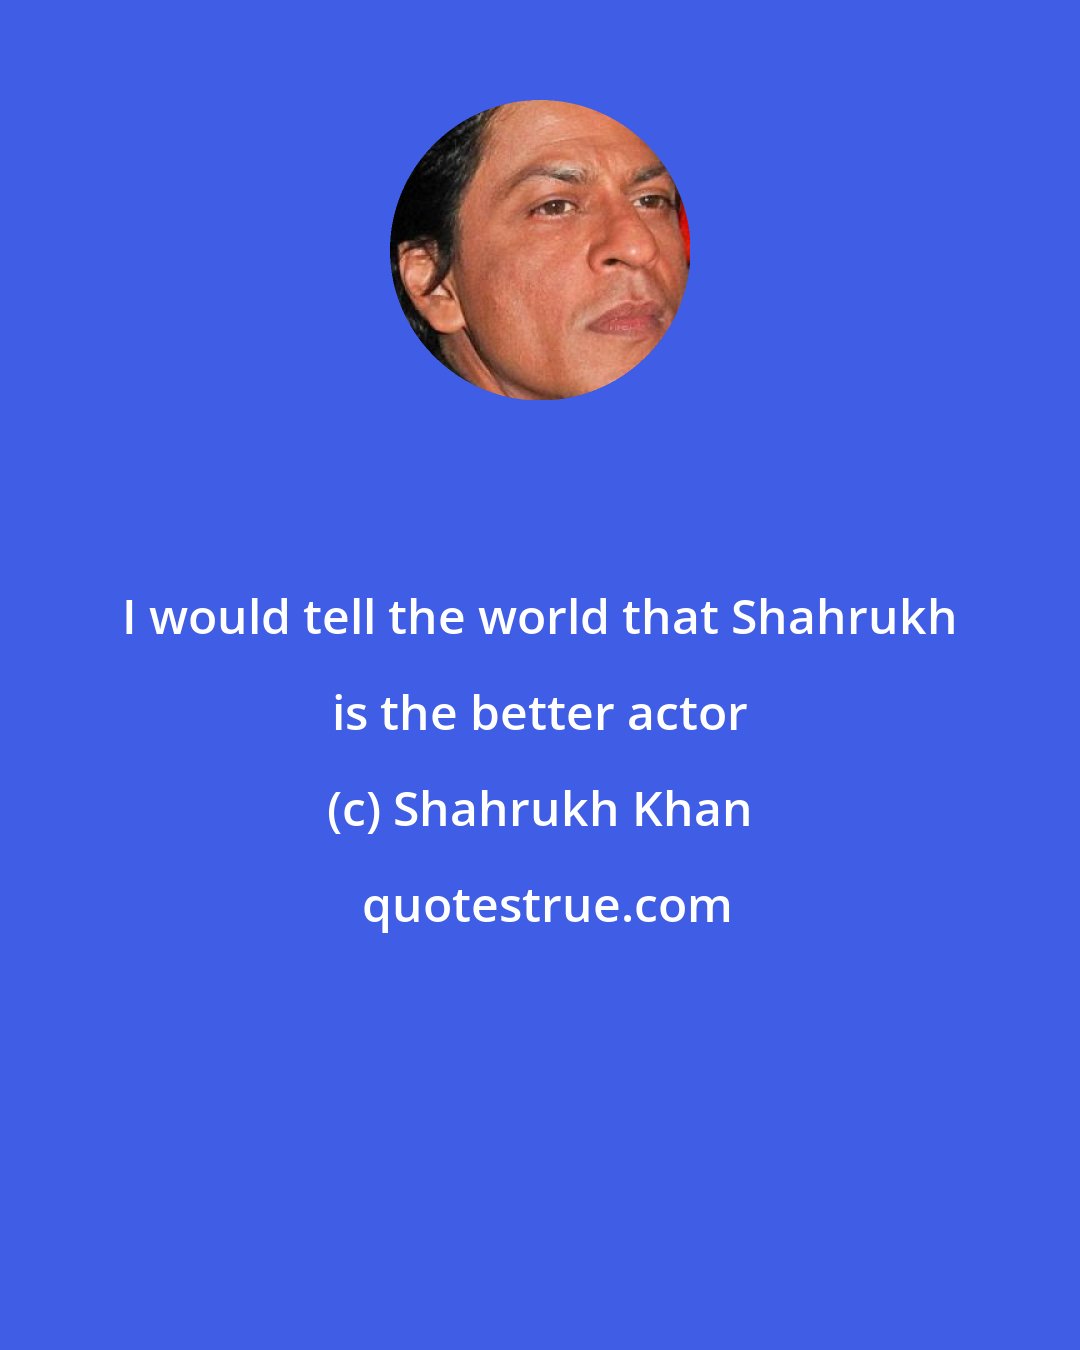 Shahrukh Khan: I would tell the world that Shahrukh is the better actor